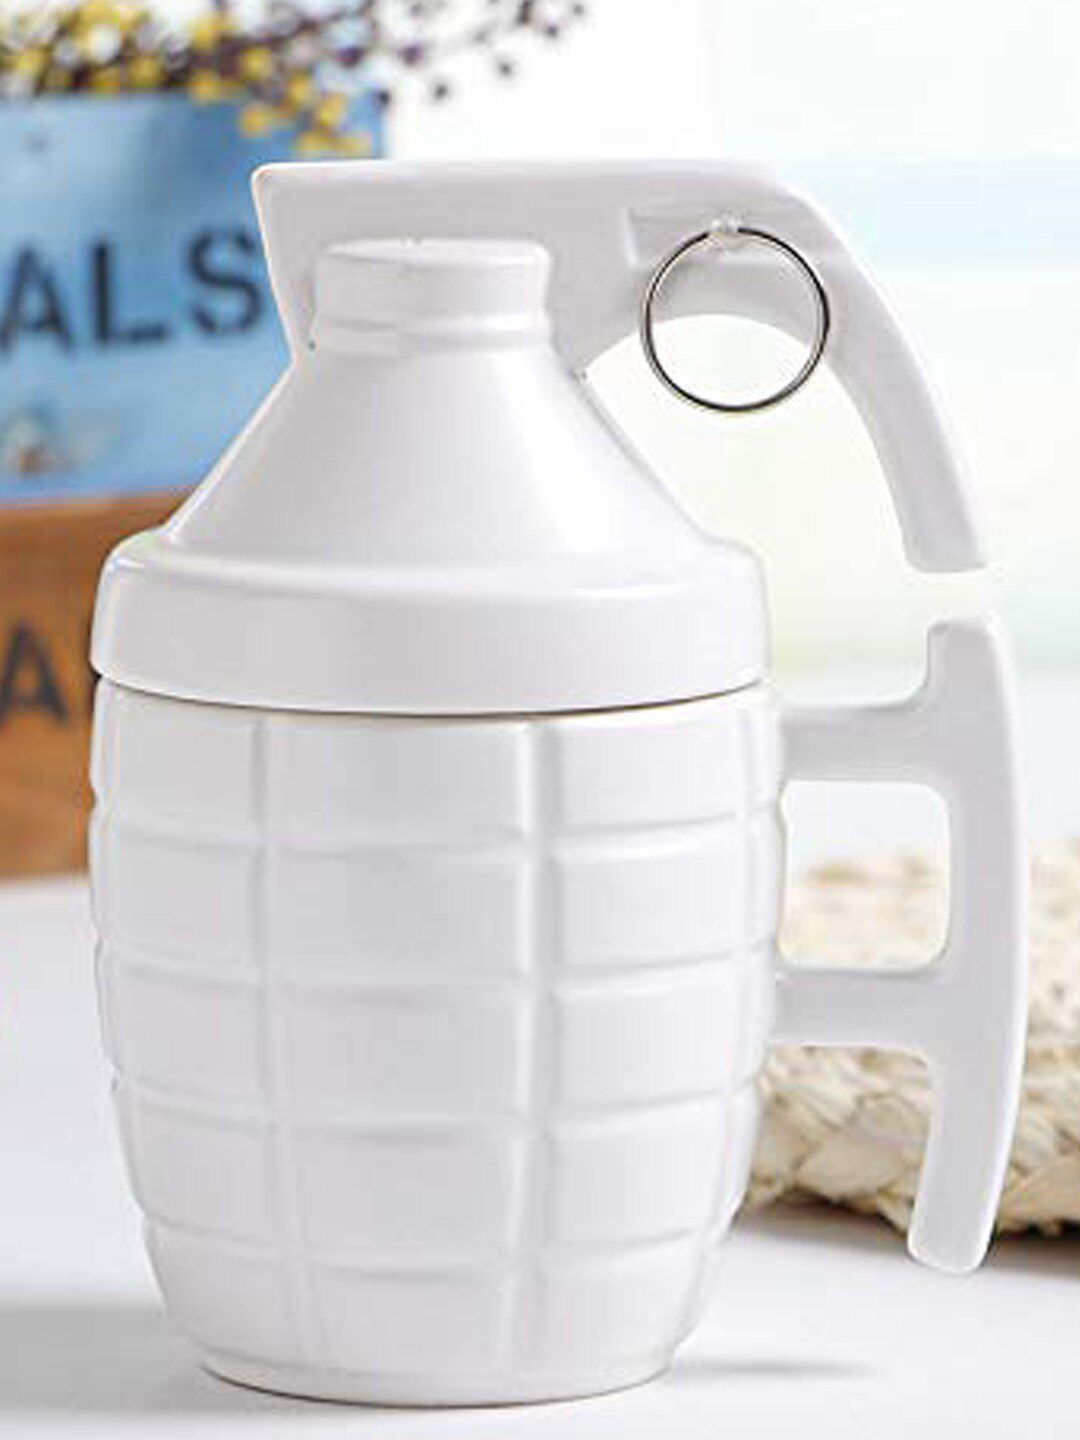 BonZeaL White 3D Ceramic Army Style Grenade Coffee Mug with Lid Price in India